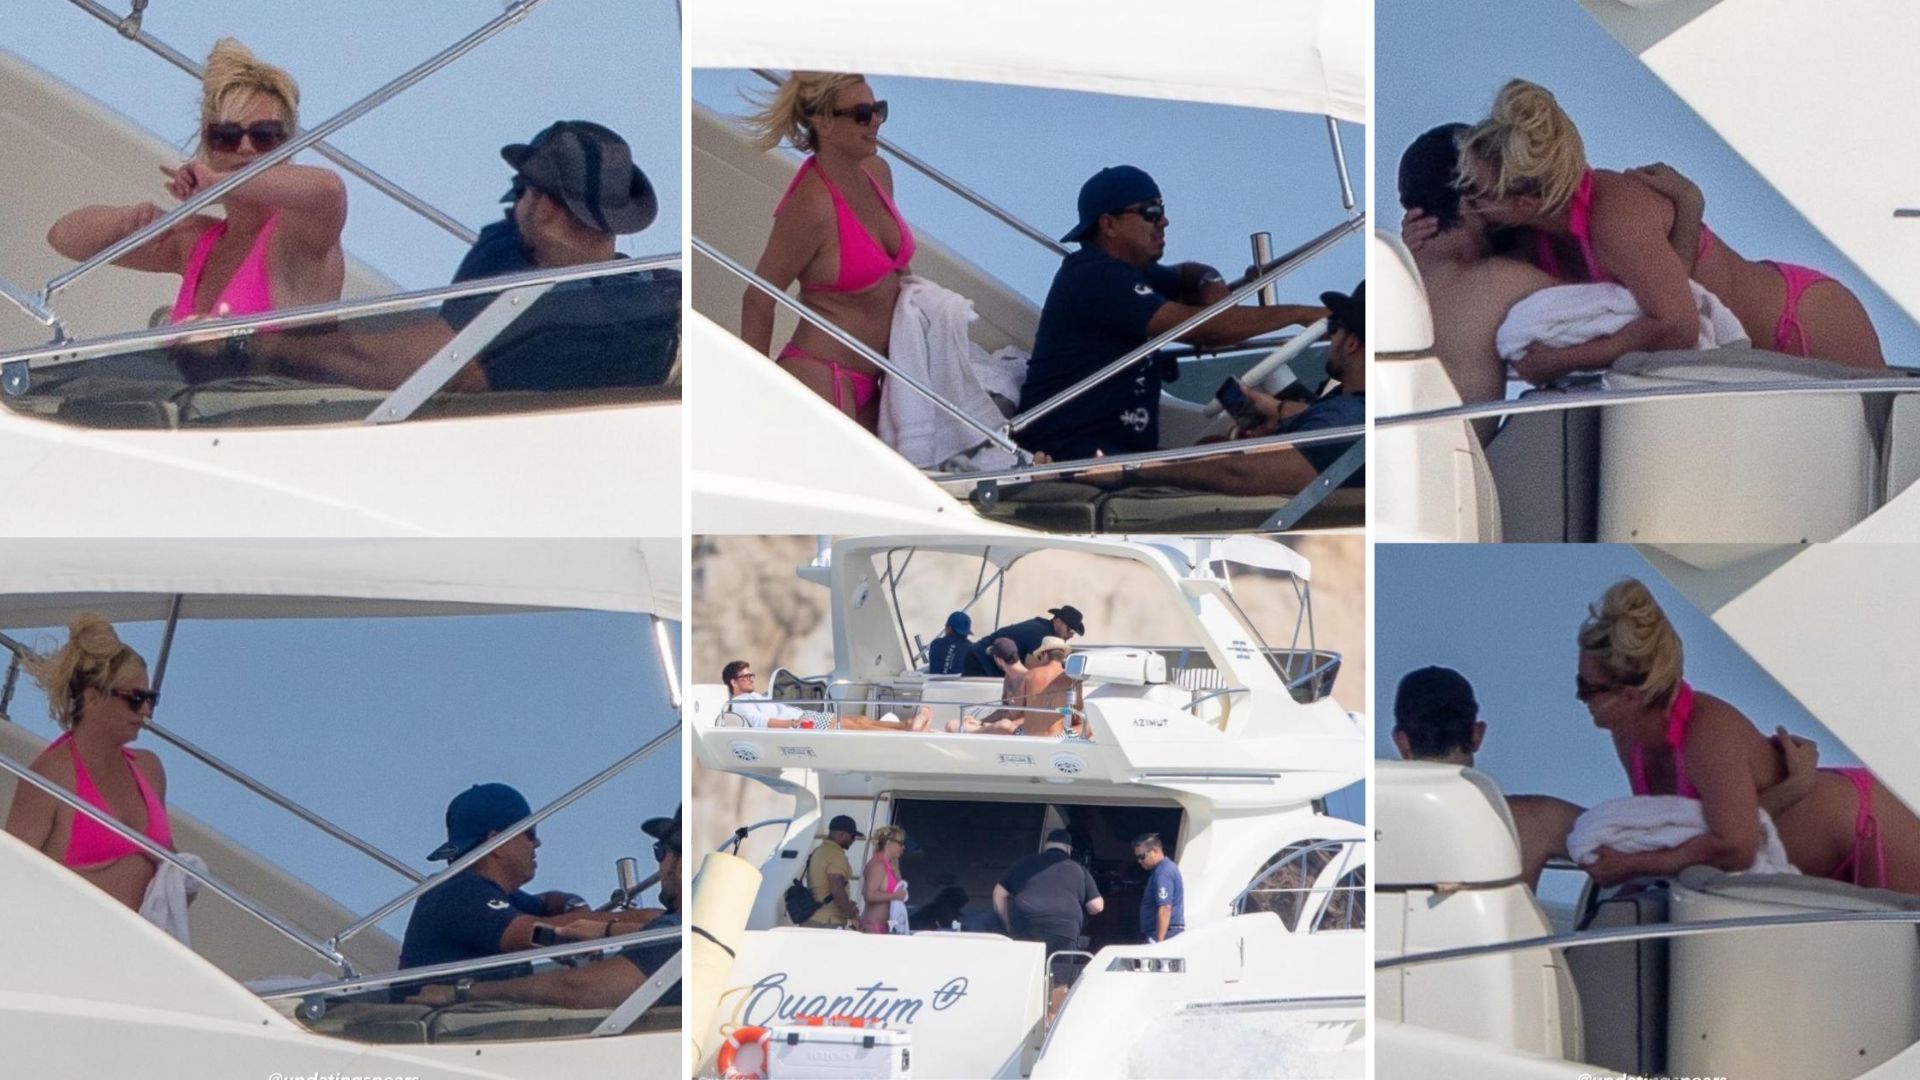 Britney Spears dazzles in Cabo San Lucas